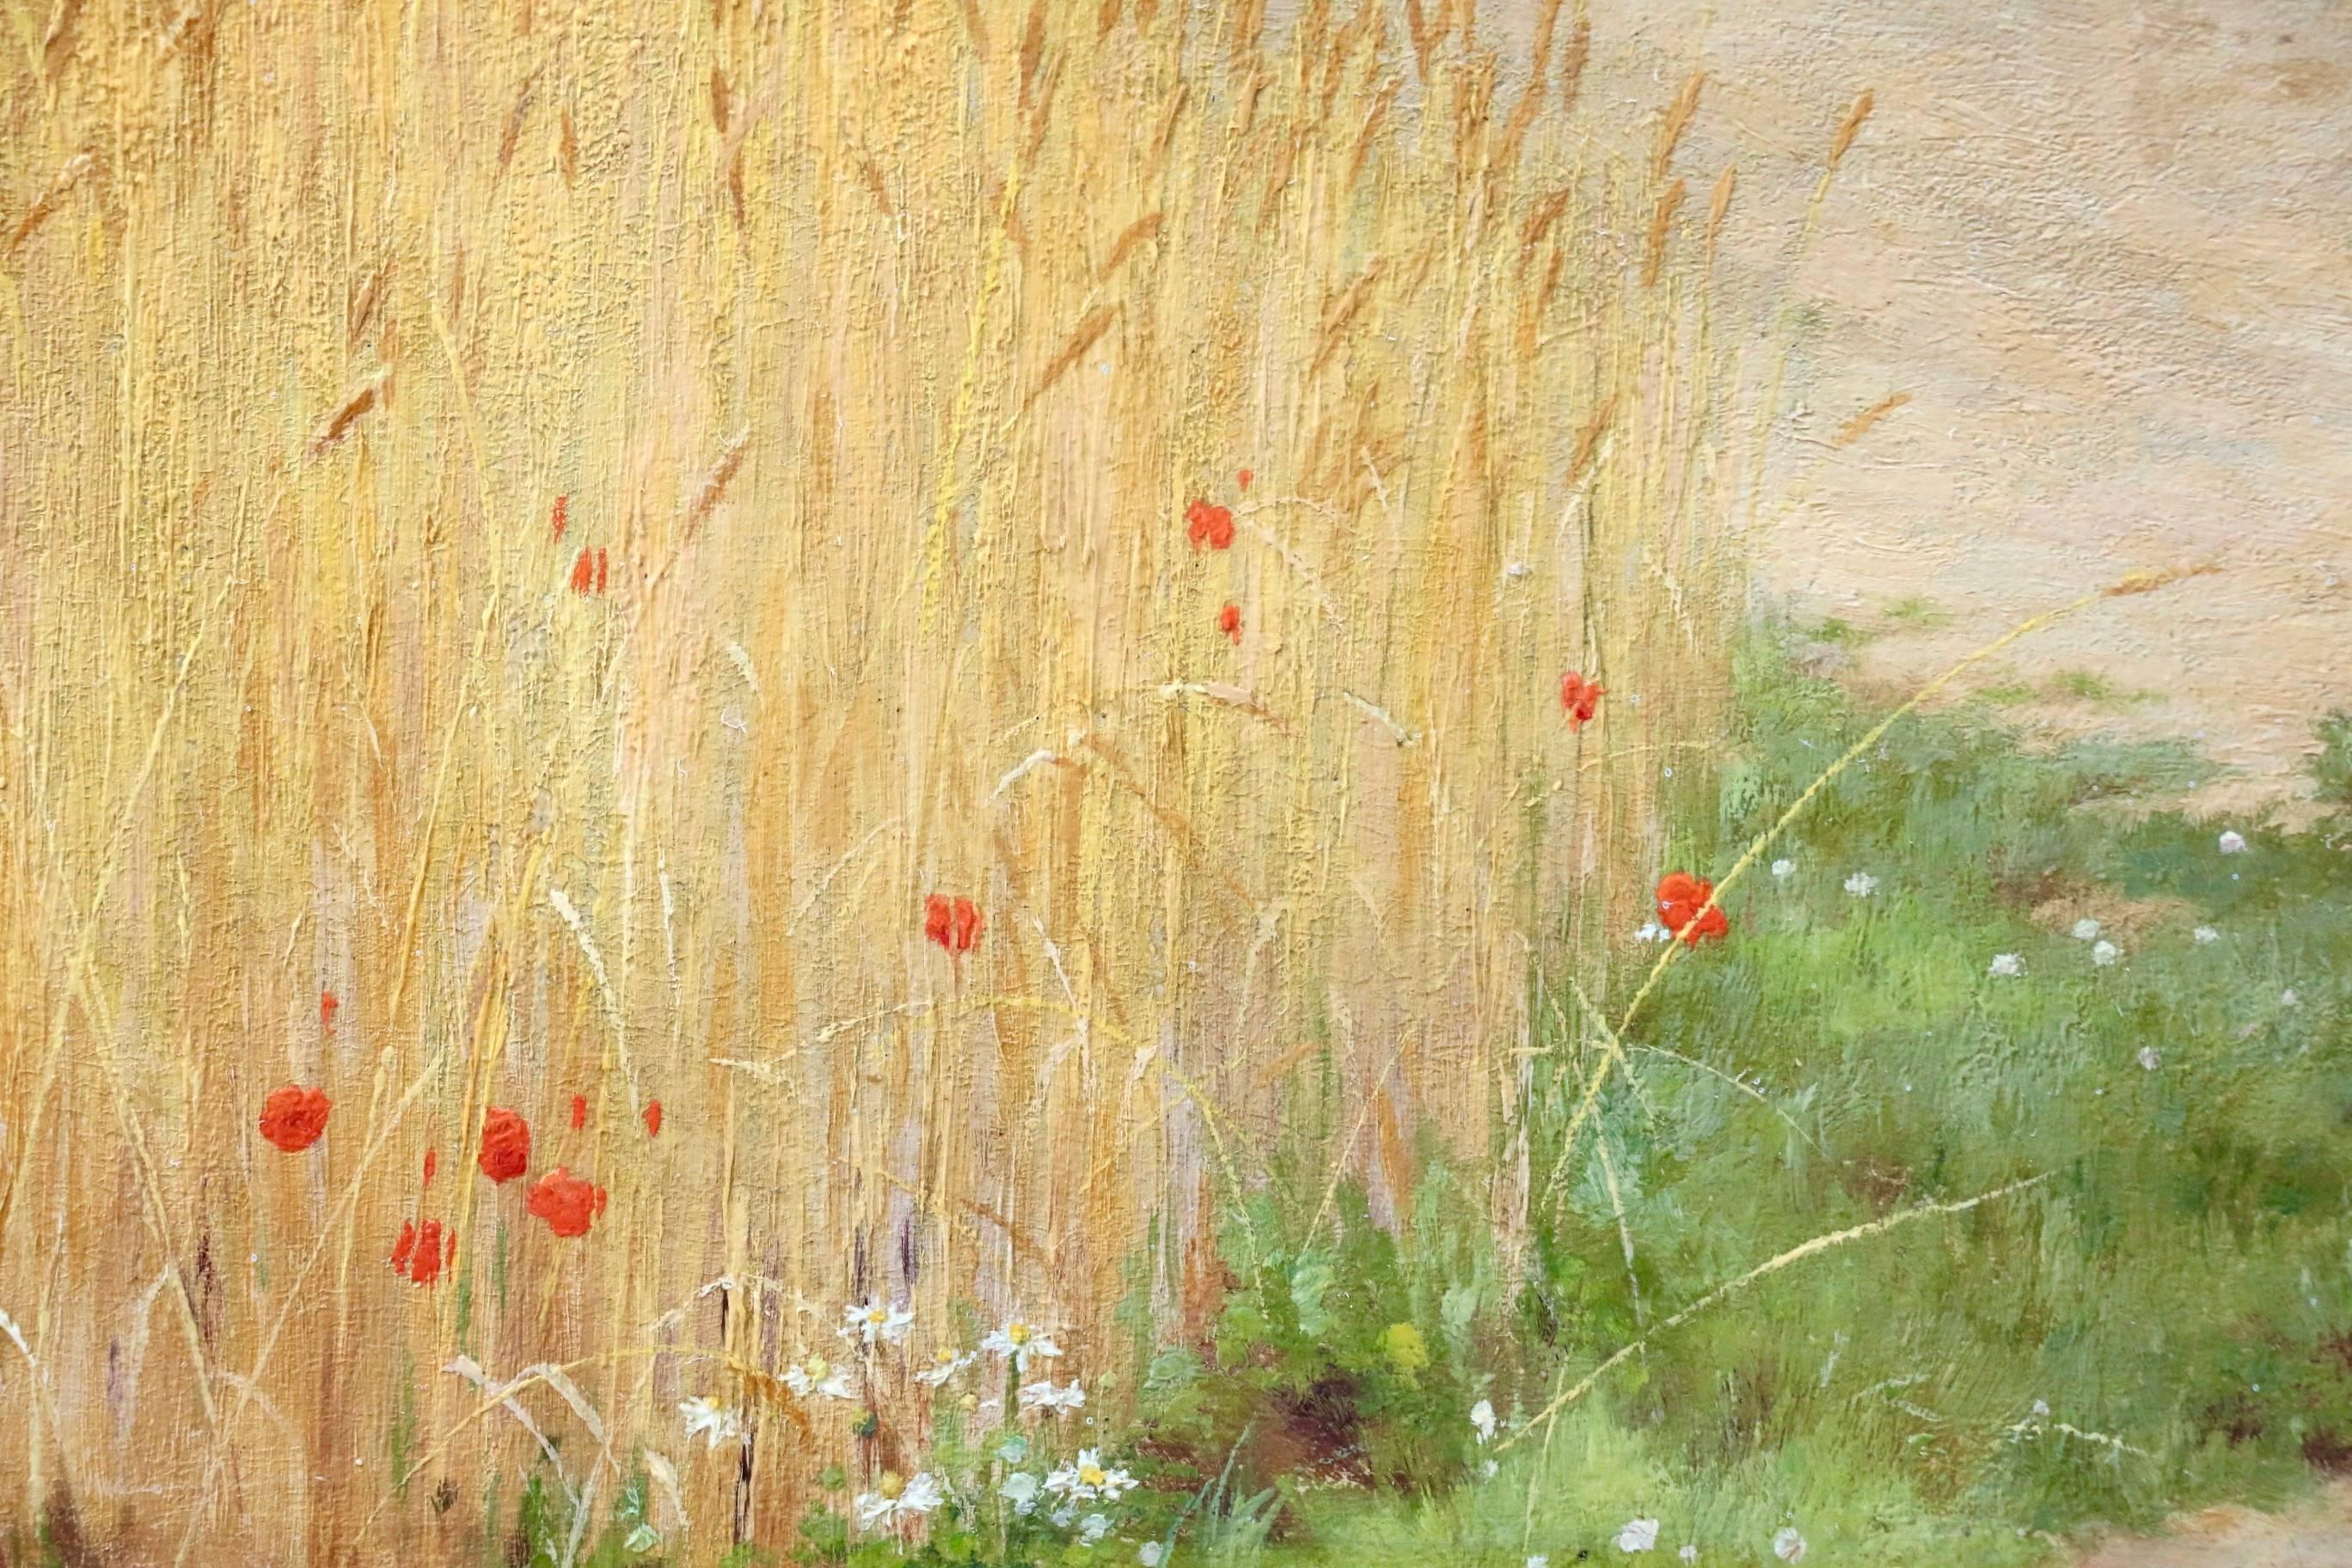 Poppies in the Cornfield - Painting by Paul Camille Guigou